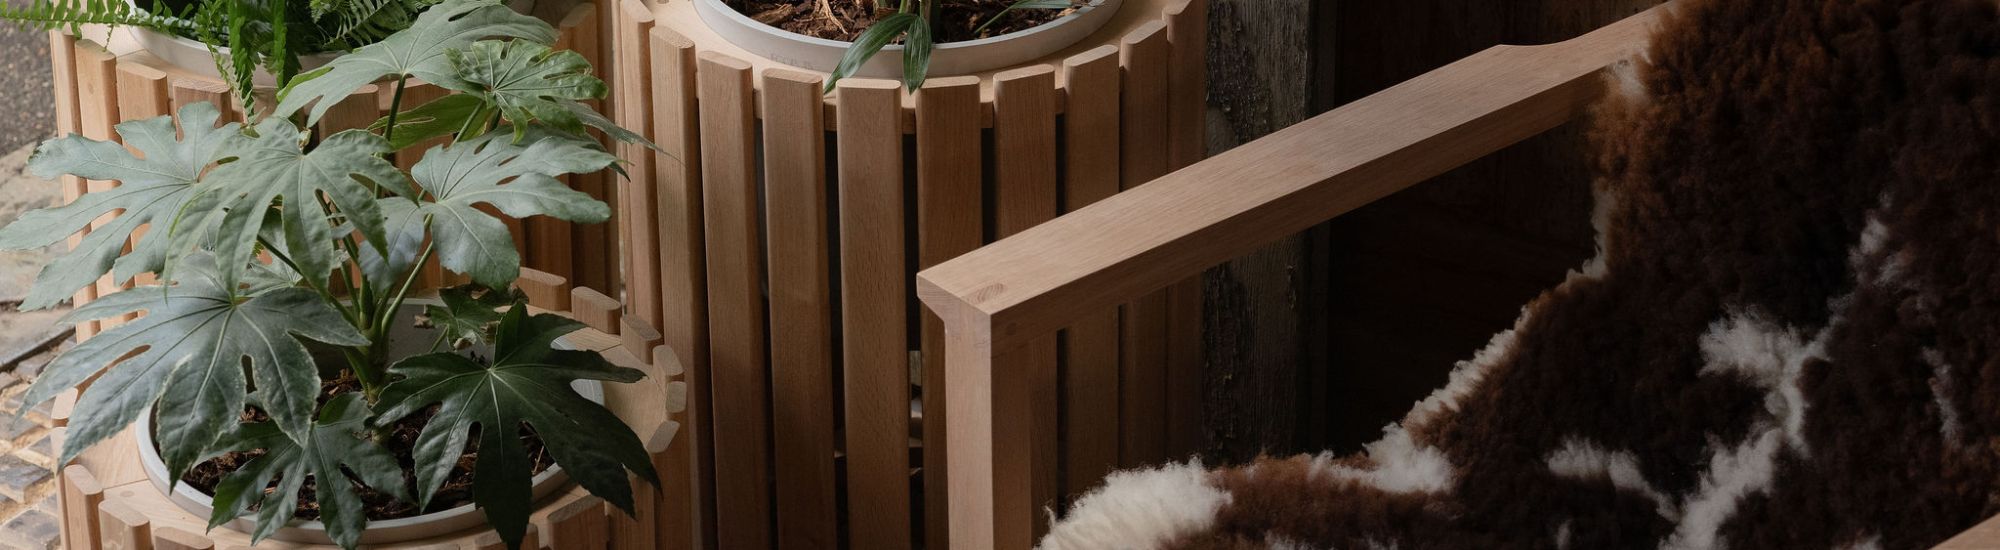 3 wooden planters and an wooden chair